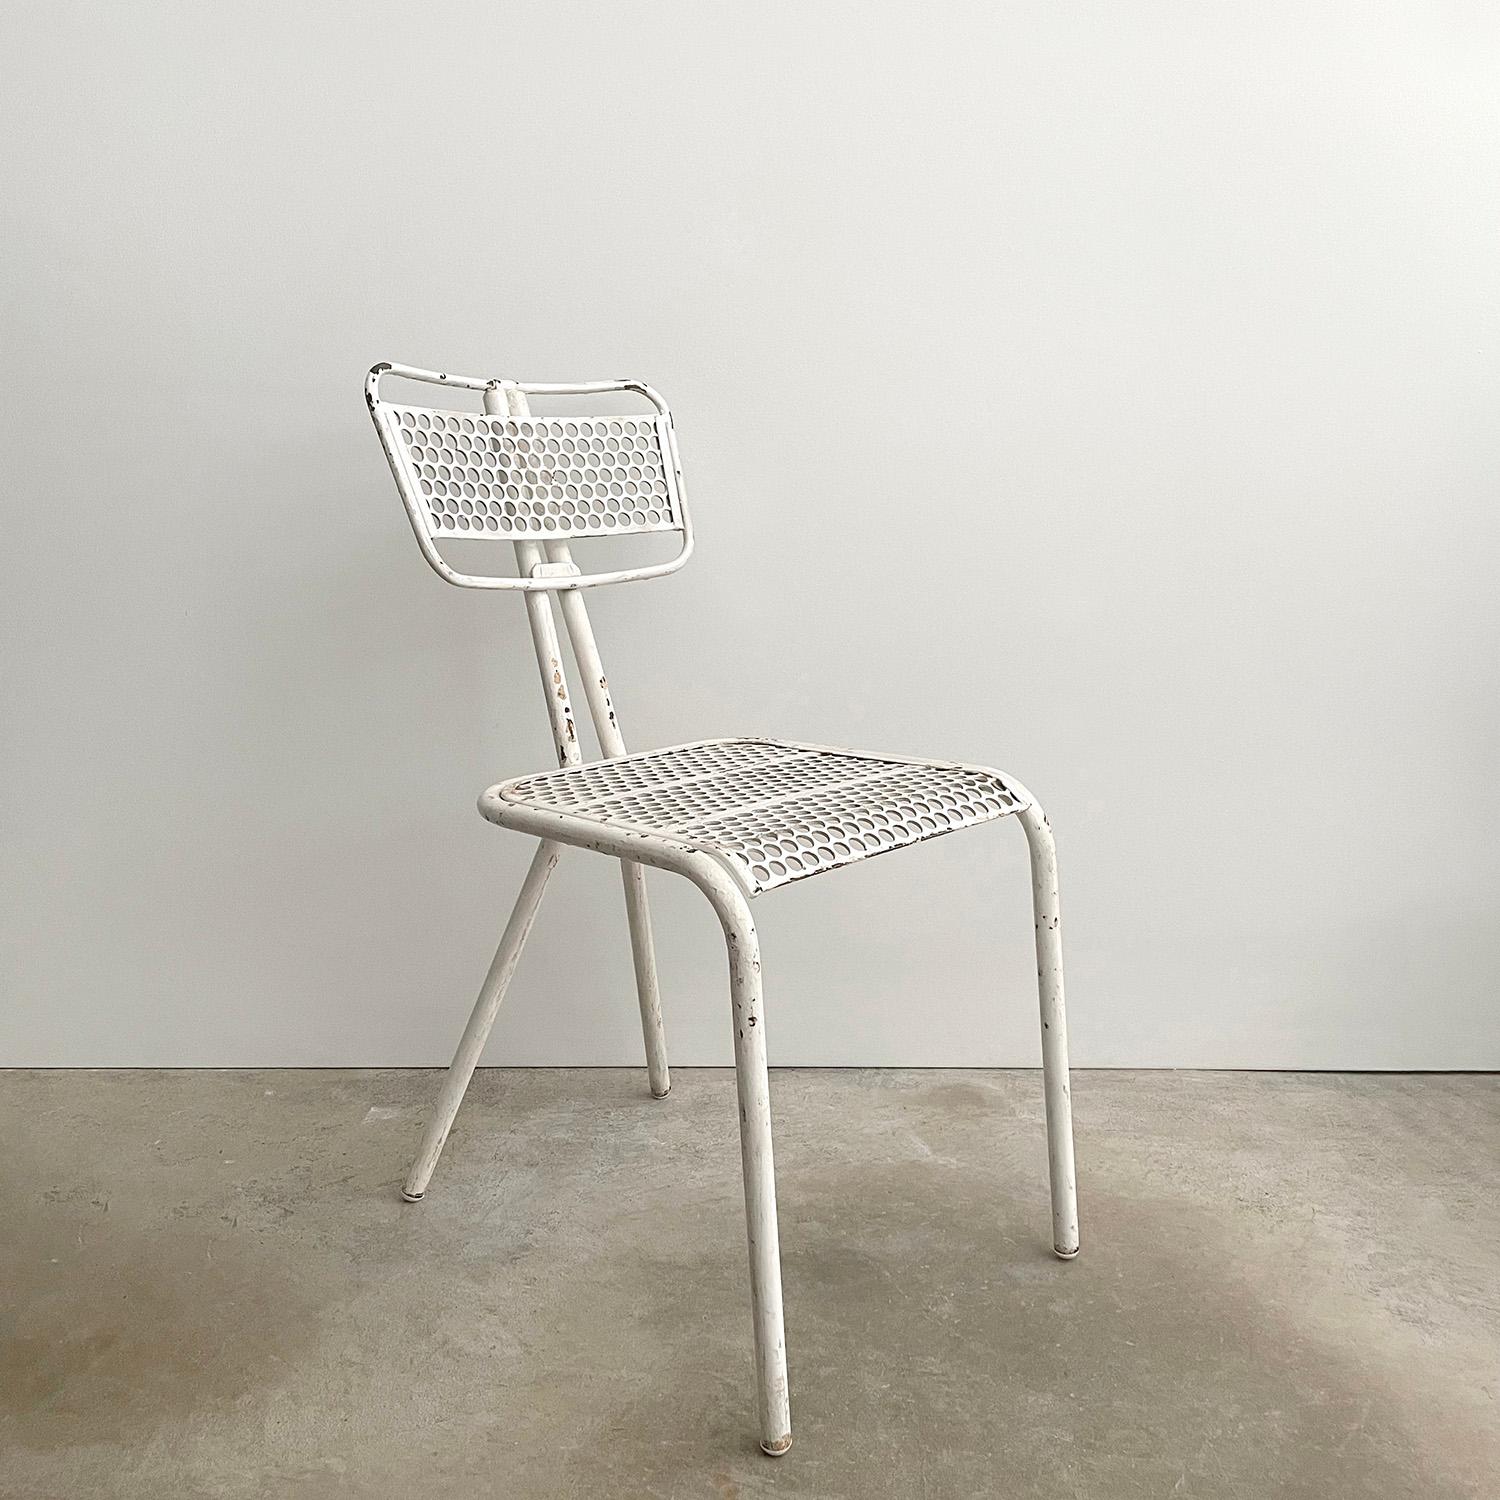 René Malaval for Bloc Metal 
France, post war 
This vintage metal side chair will add wonderful texture and rich history to any room
Composed of perforated metal backrests/seats 
Tubular steel legs 
Surprisingly comfortable
Unique architectural